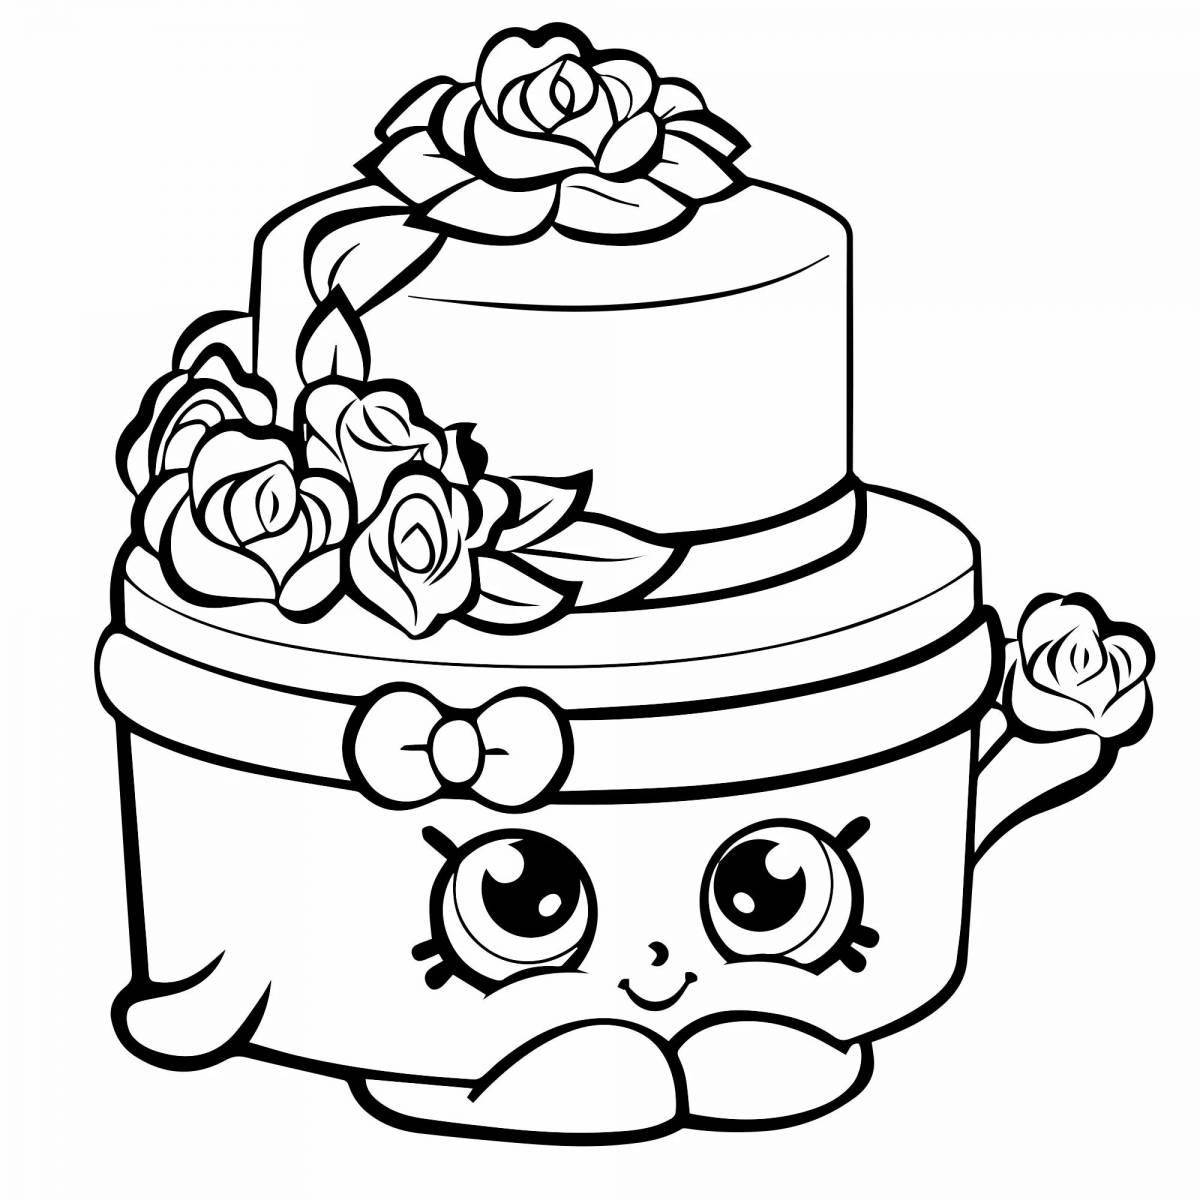 Tempting Cake Coloring Pages for Girls